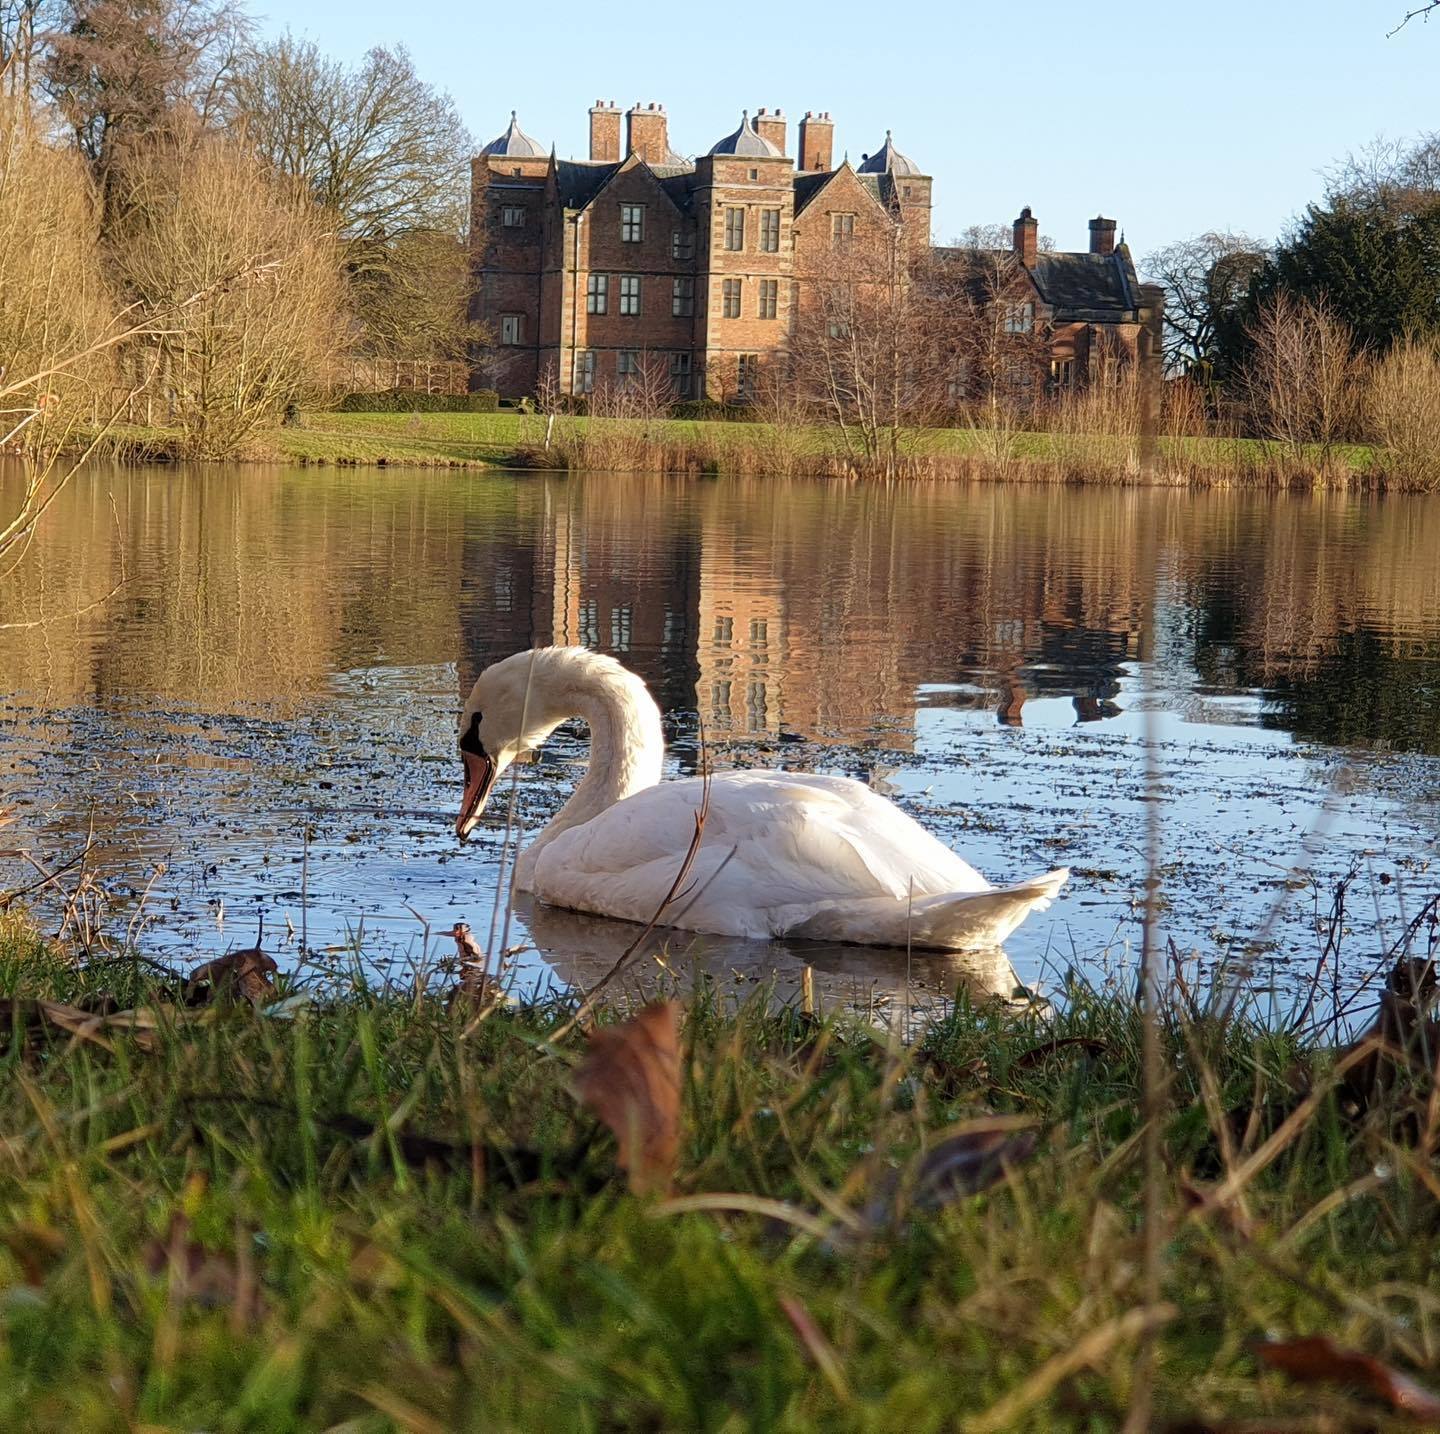 Swans on the lake at Kiplin Hall and Gardens are part of the attraction’s reputation for calm tranquillity